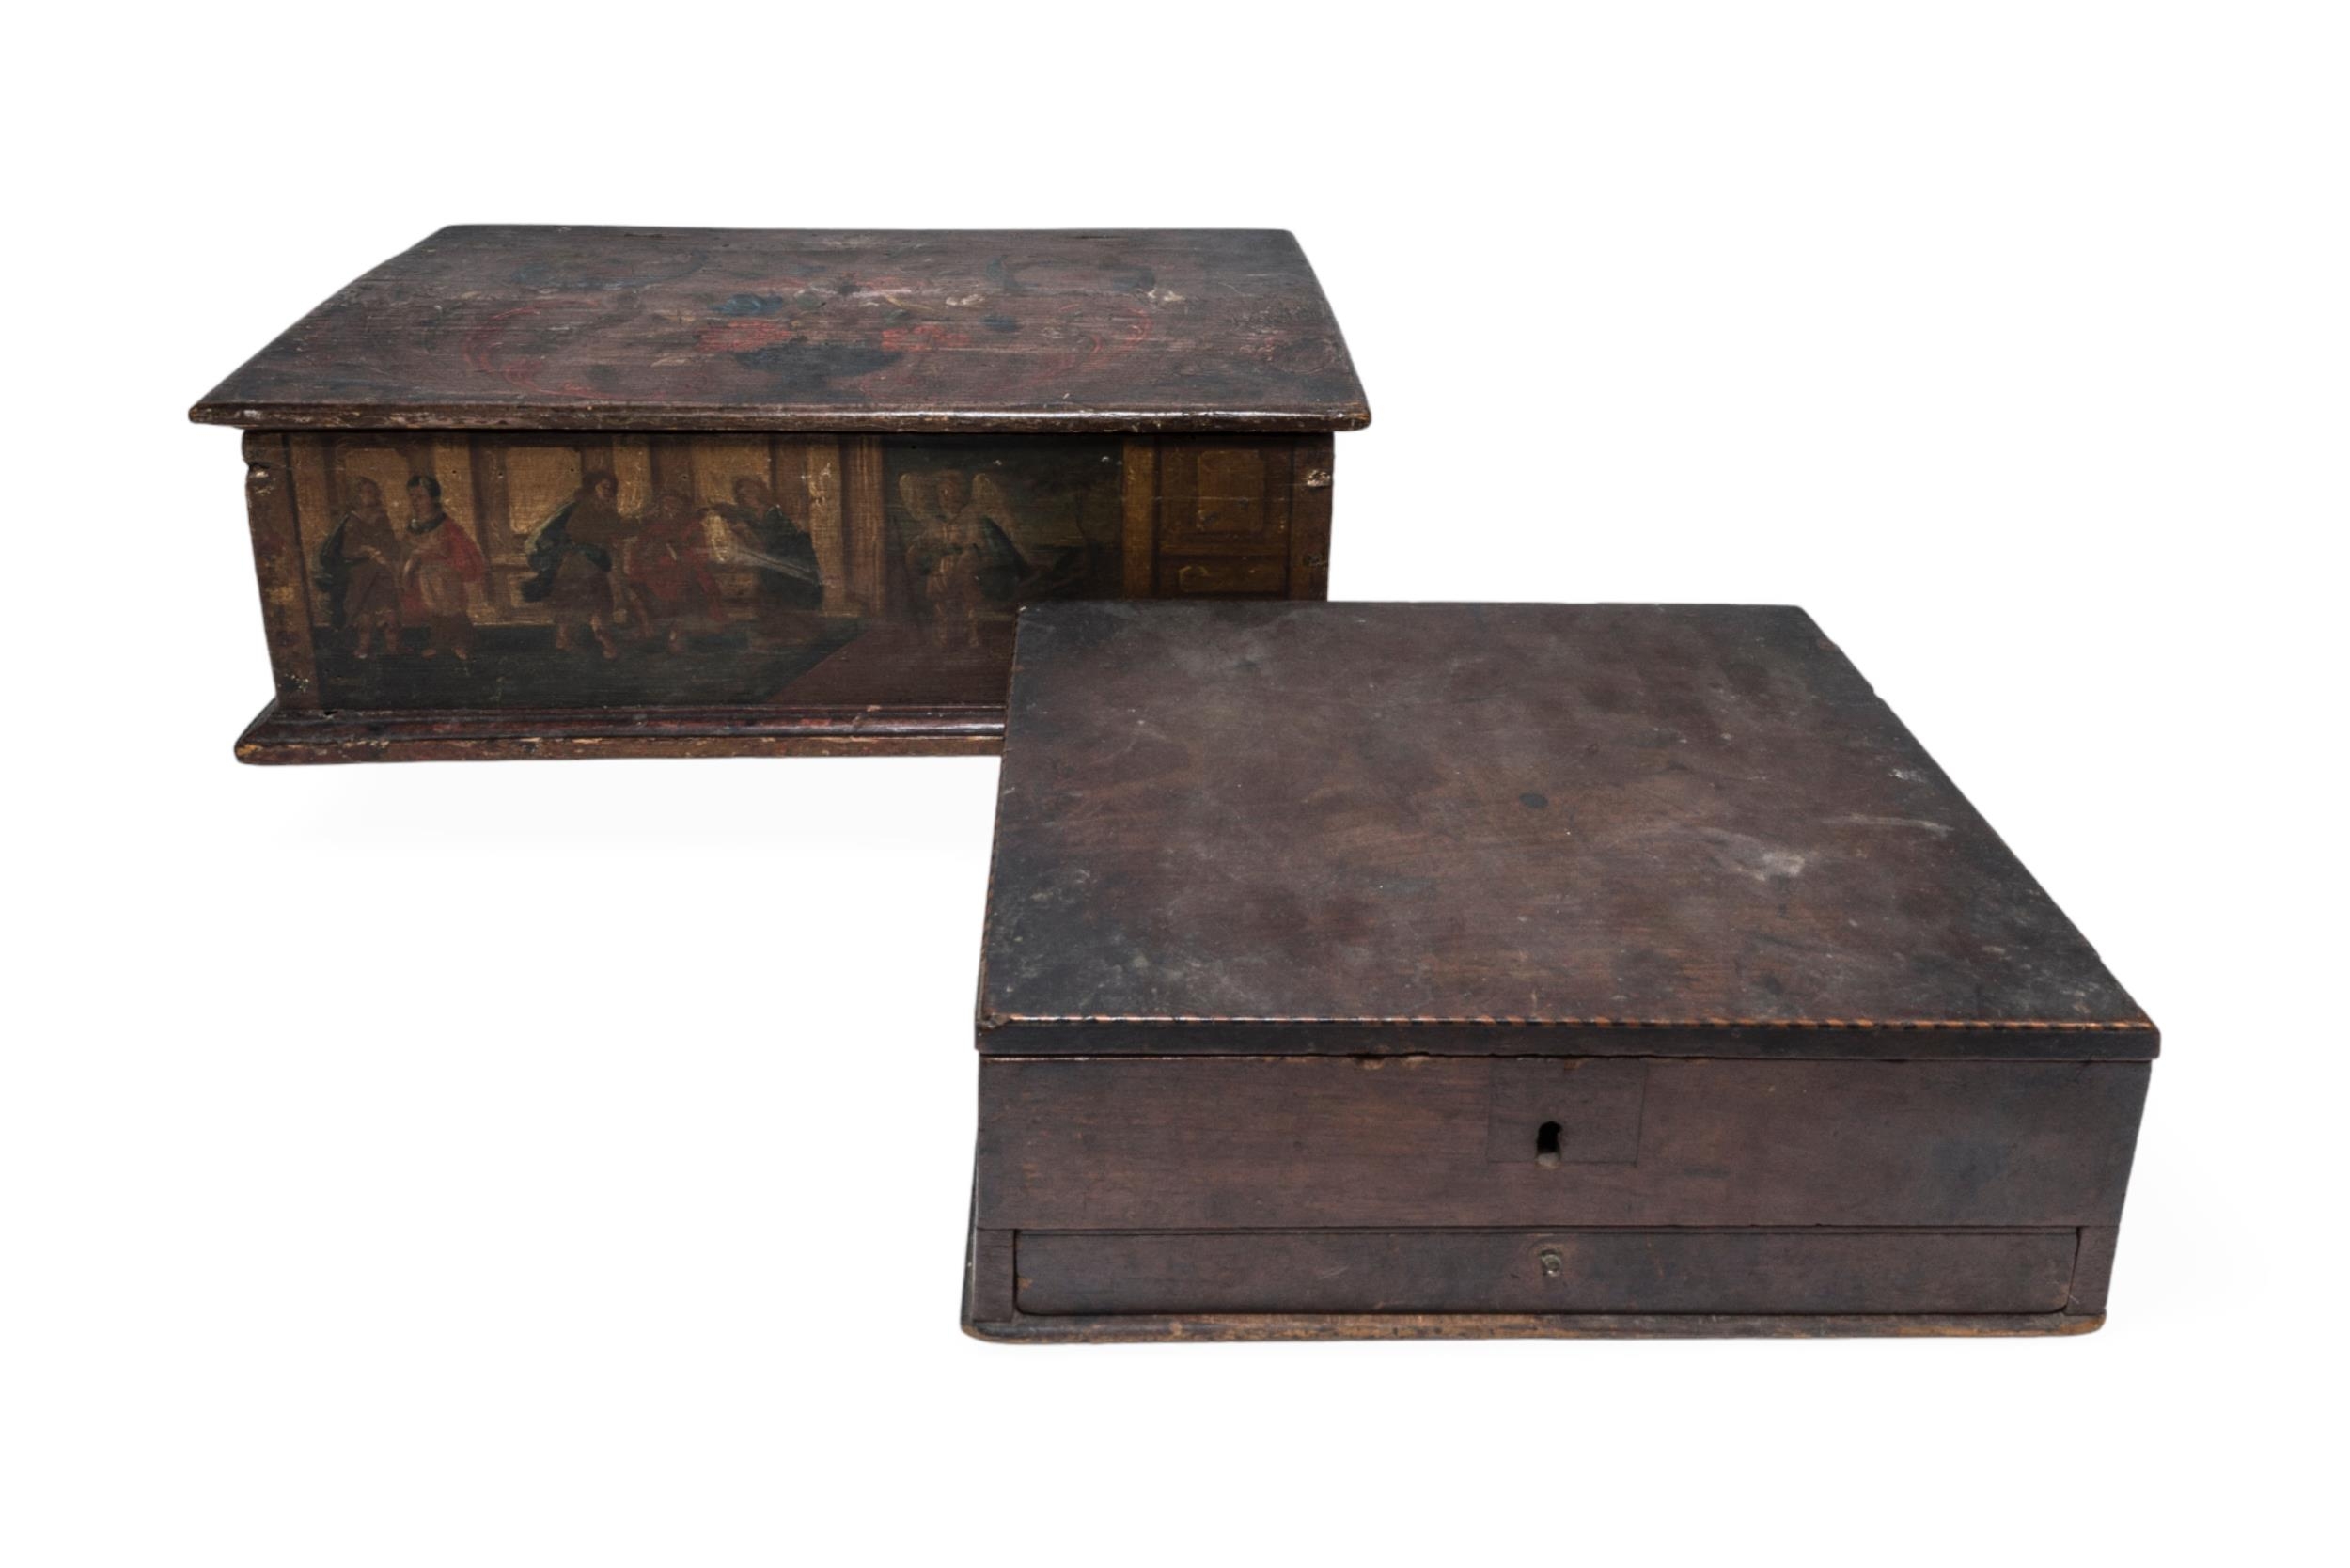 A CONTINENTAL PINE BOX, probably late 18th century, the side panels painted with three biblical